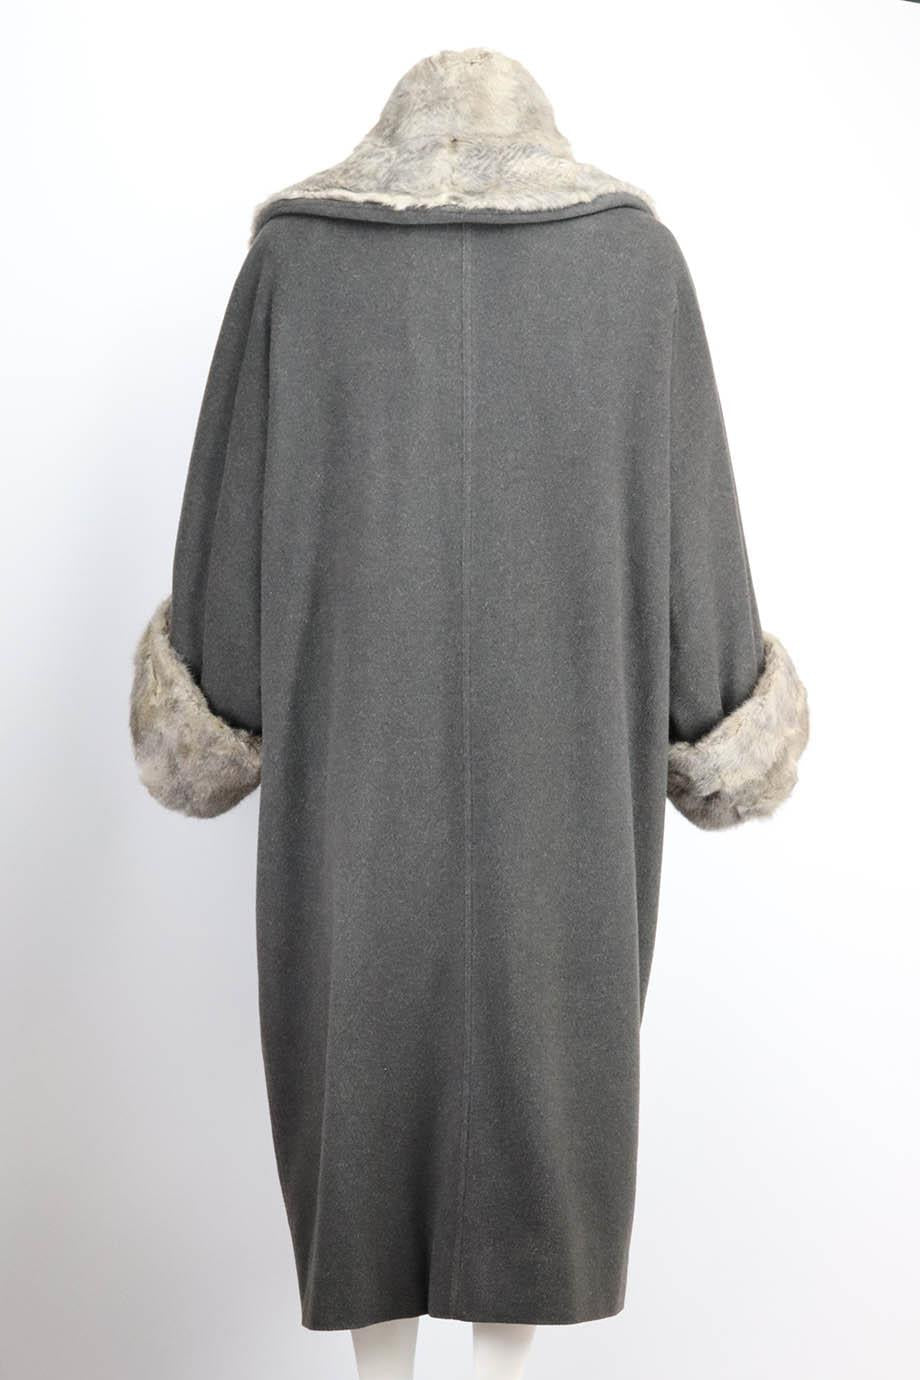 UNKNOWN BRAND FUR TRIMMED WOOL BLEND COAT ONE SIZE